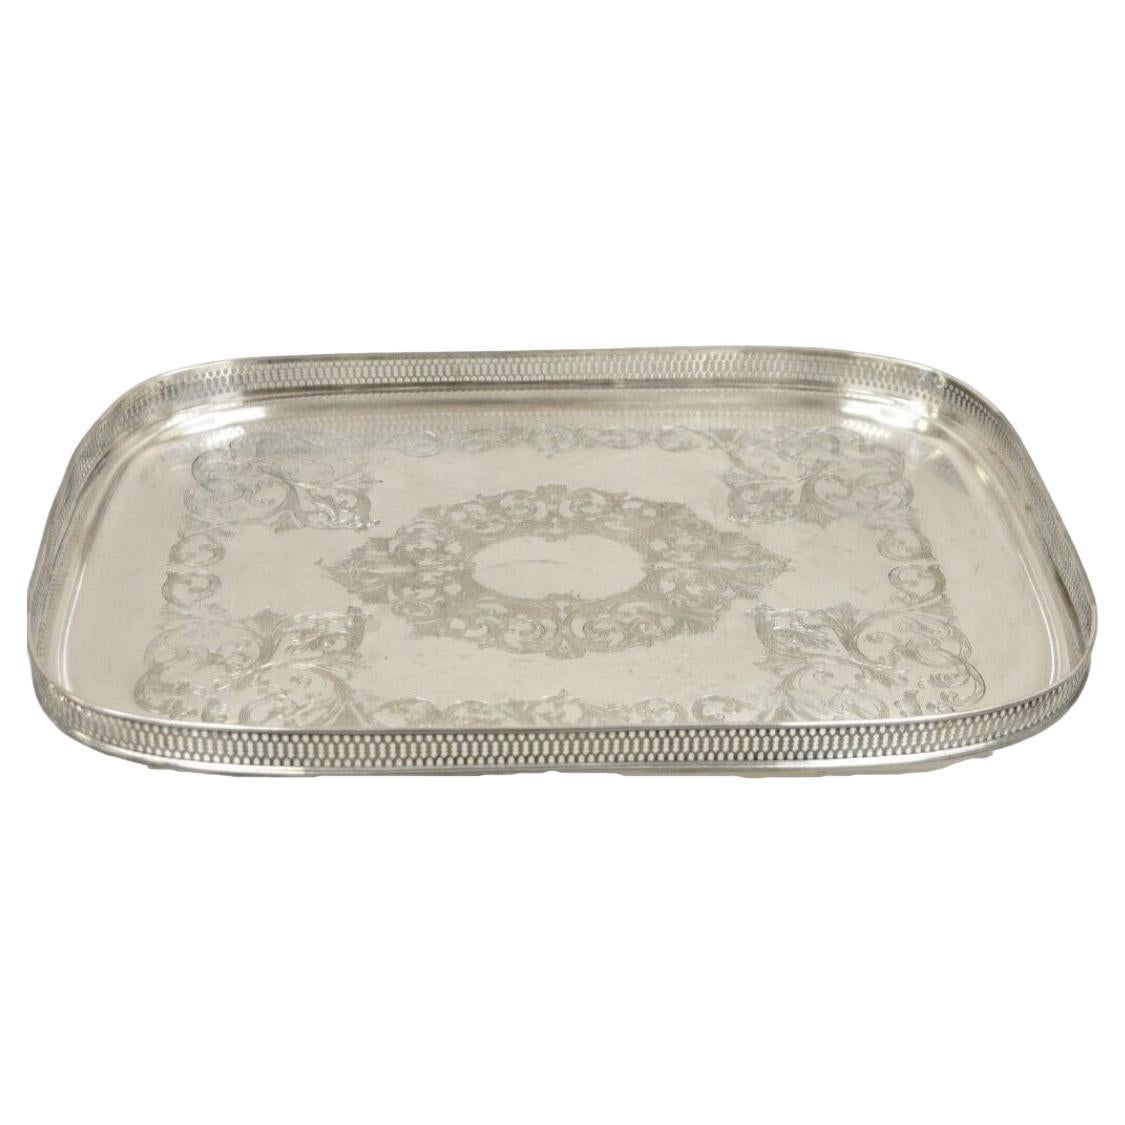 Vintage English Victorian LBS CO Superfine Silver Plated Tray with Gallery For Sale